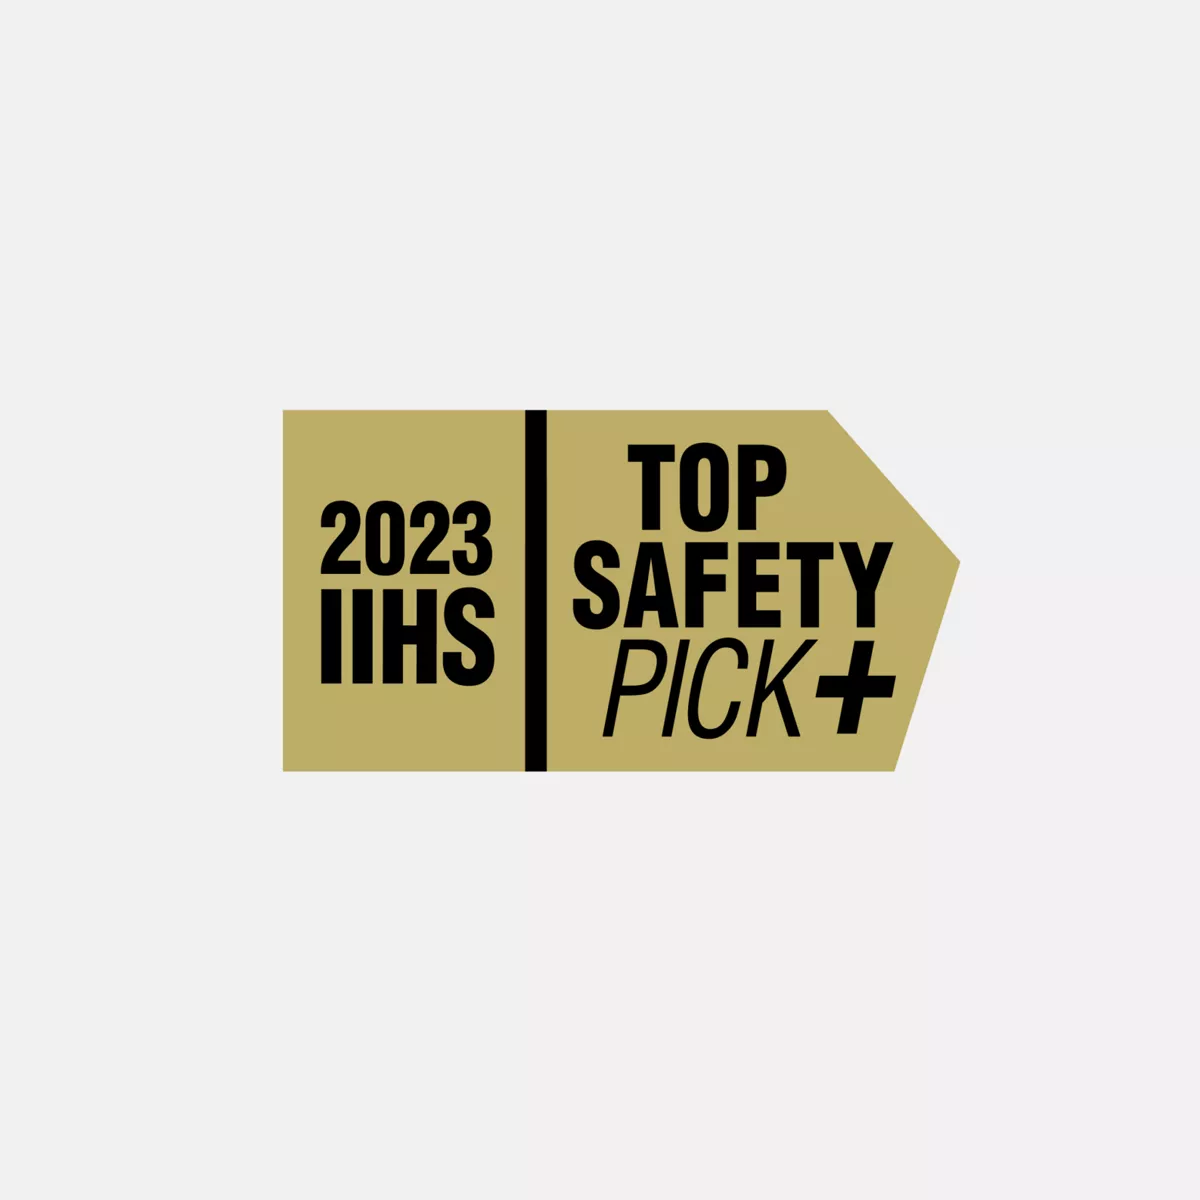 2023 IIHS top safety pick plus.